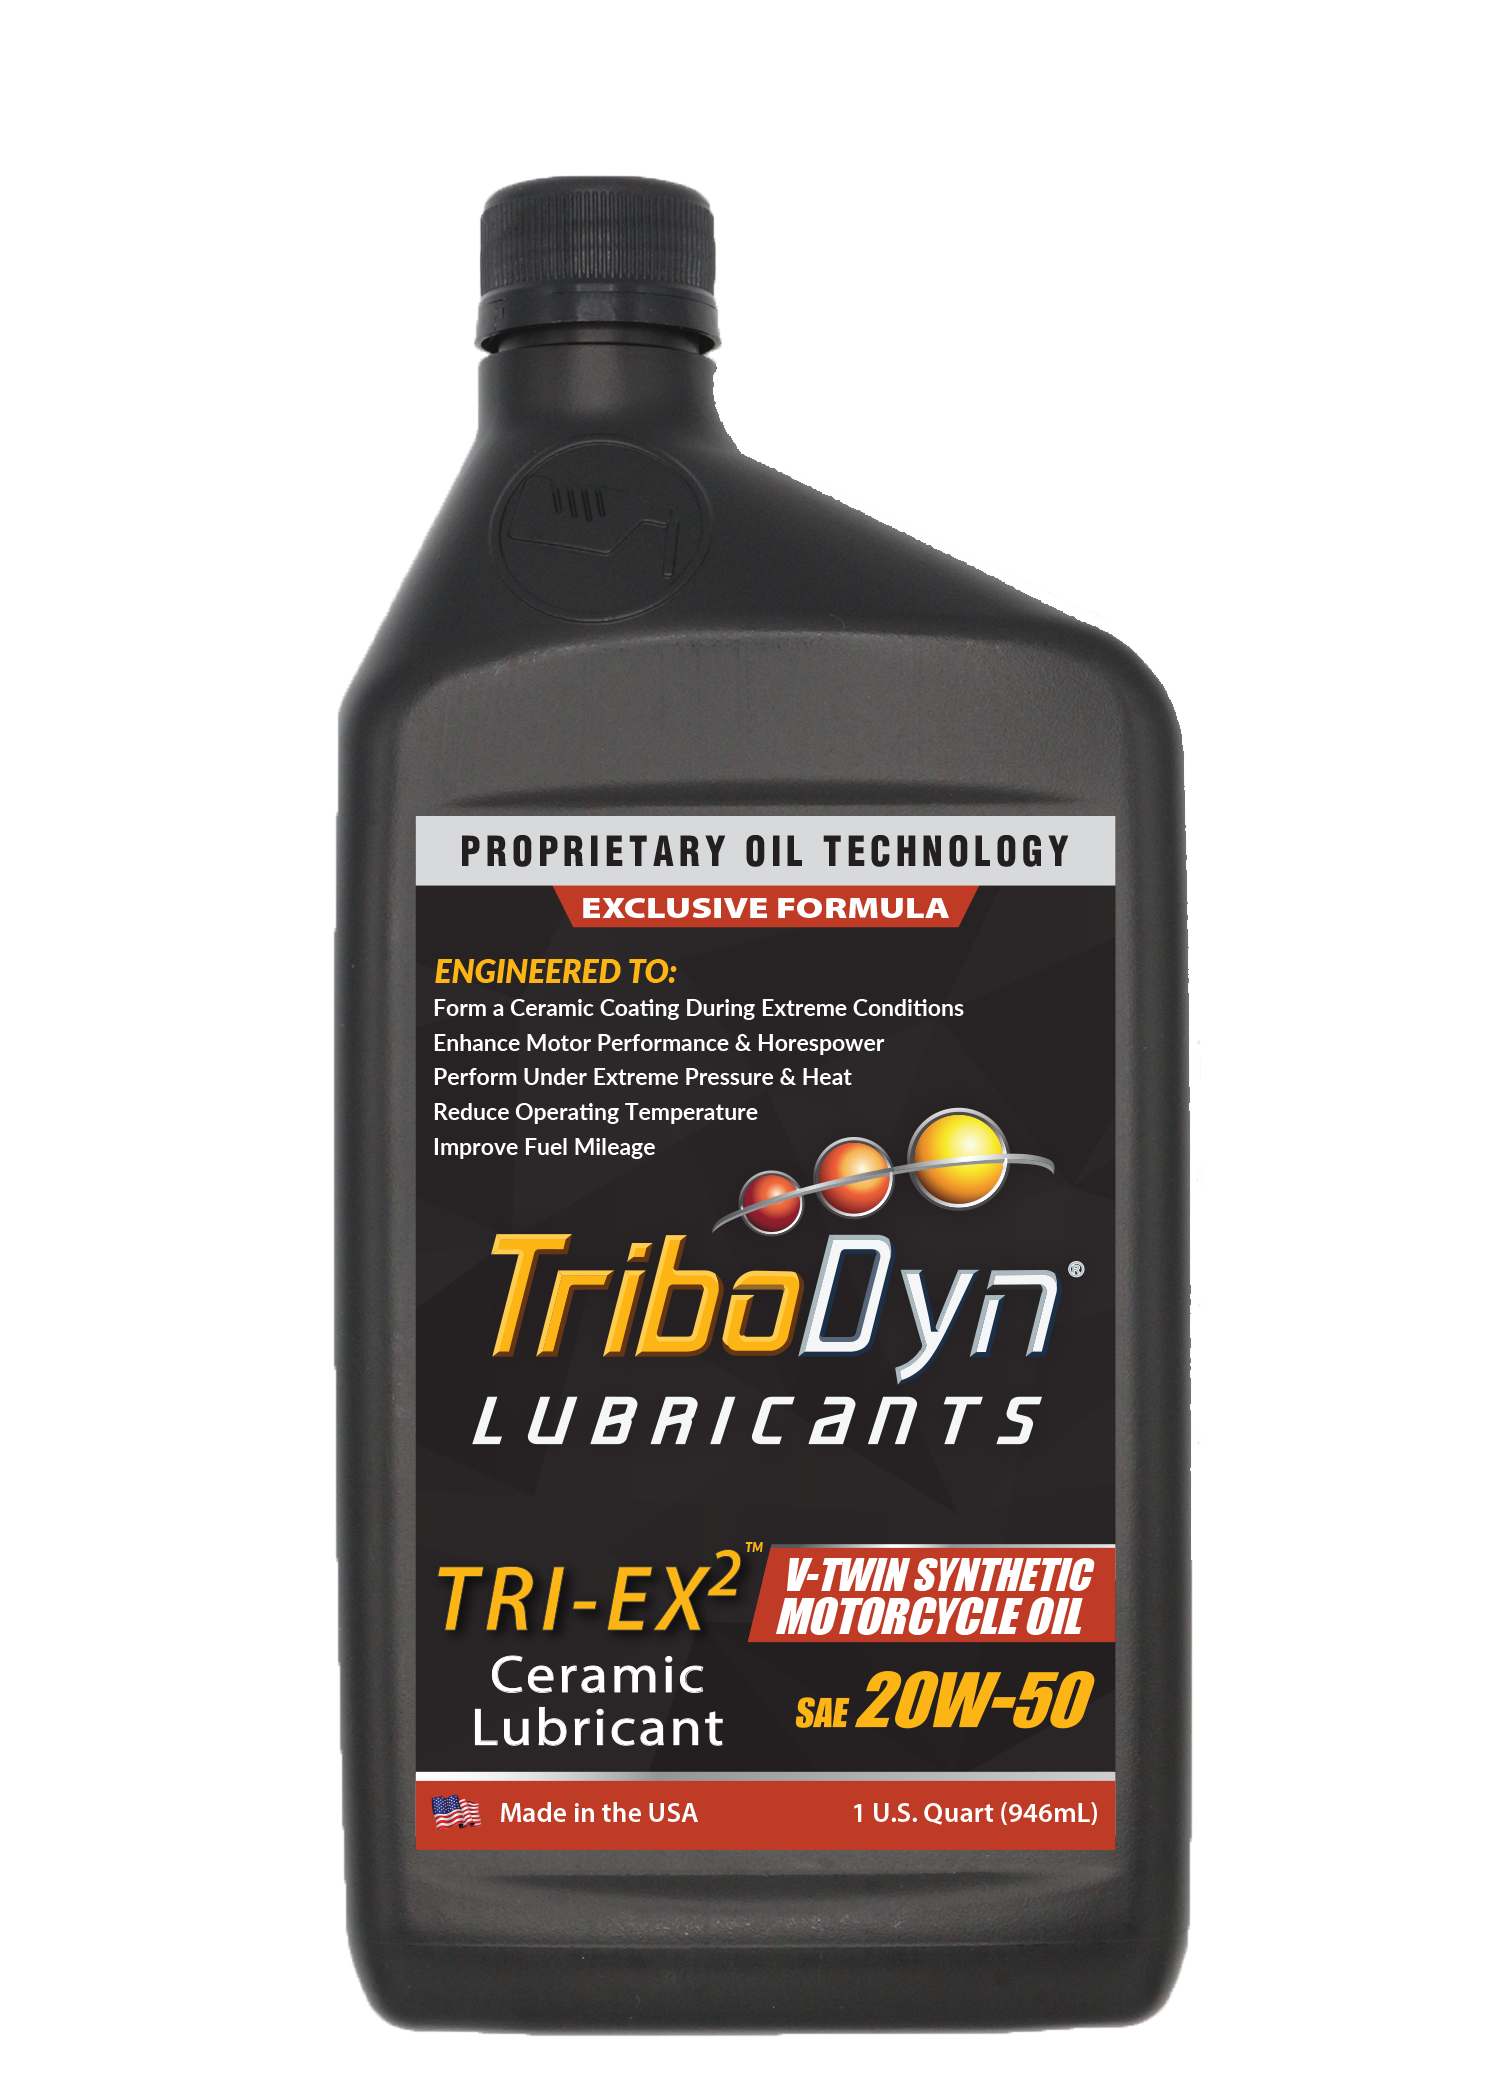 TRI-EX2 20W-50 V-Twin Synthetic Motorcycle Oil